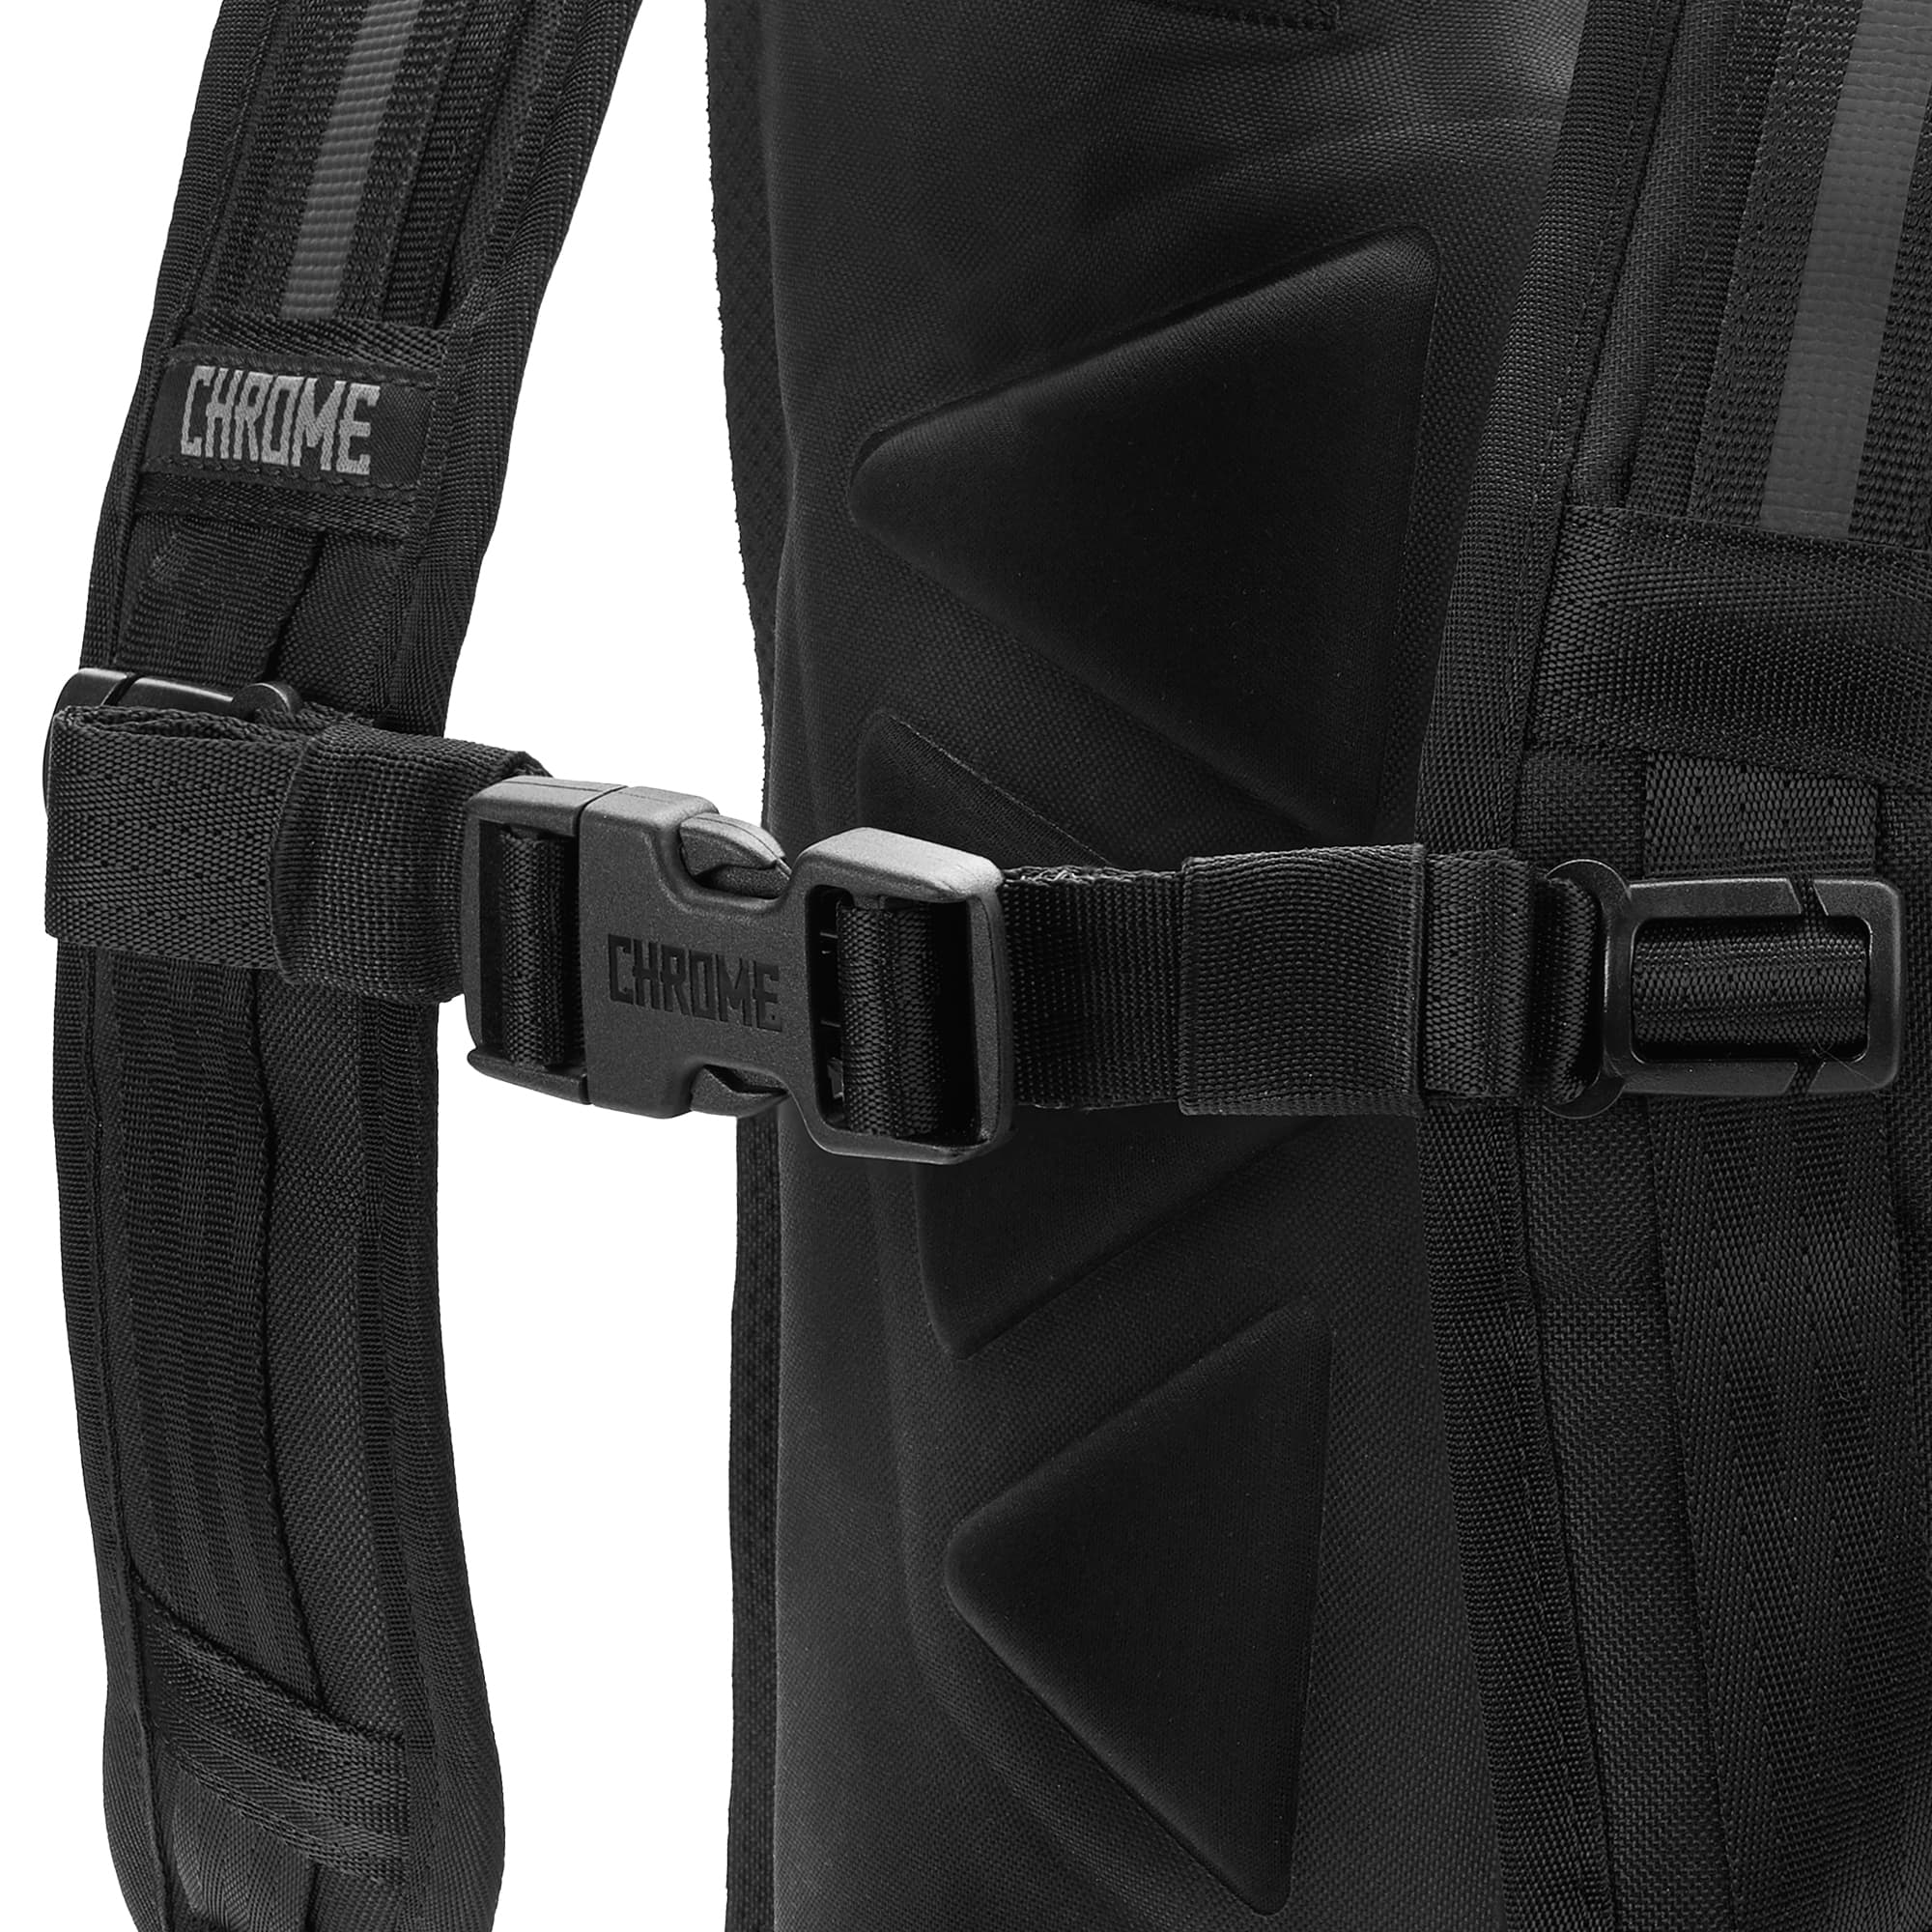 Sternum strap replacement in black shown on a bag